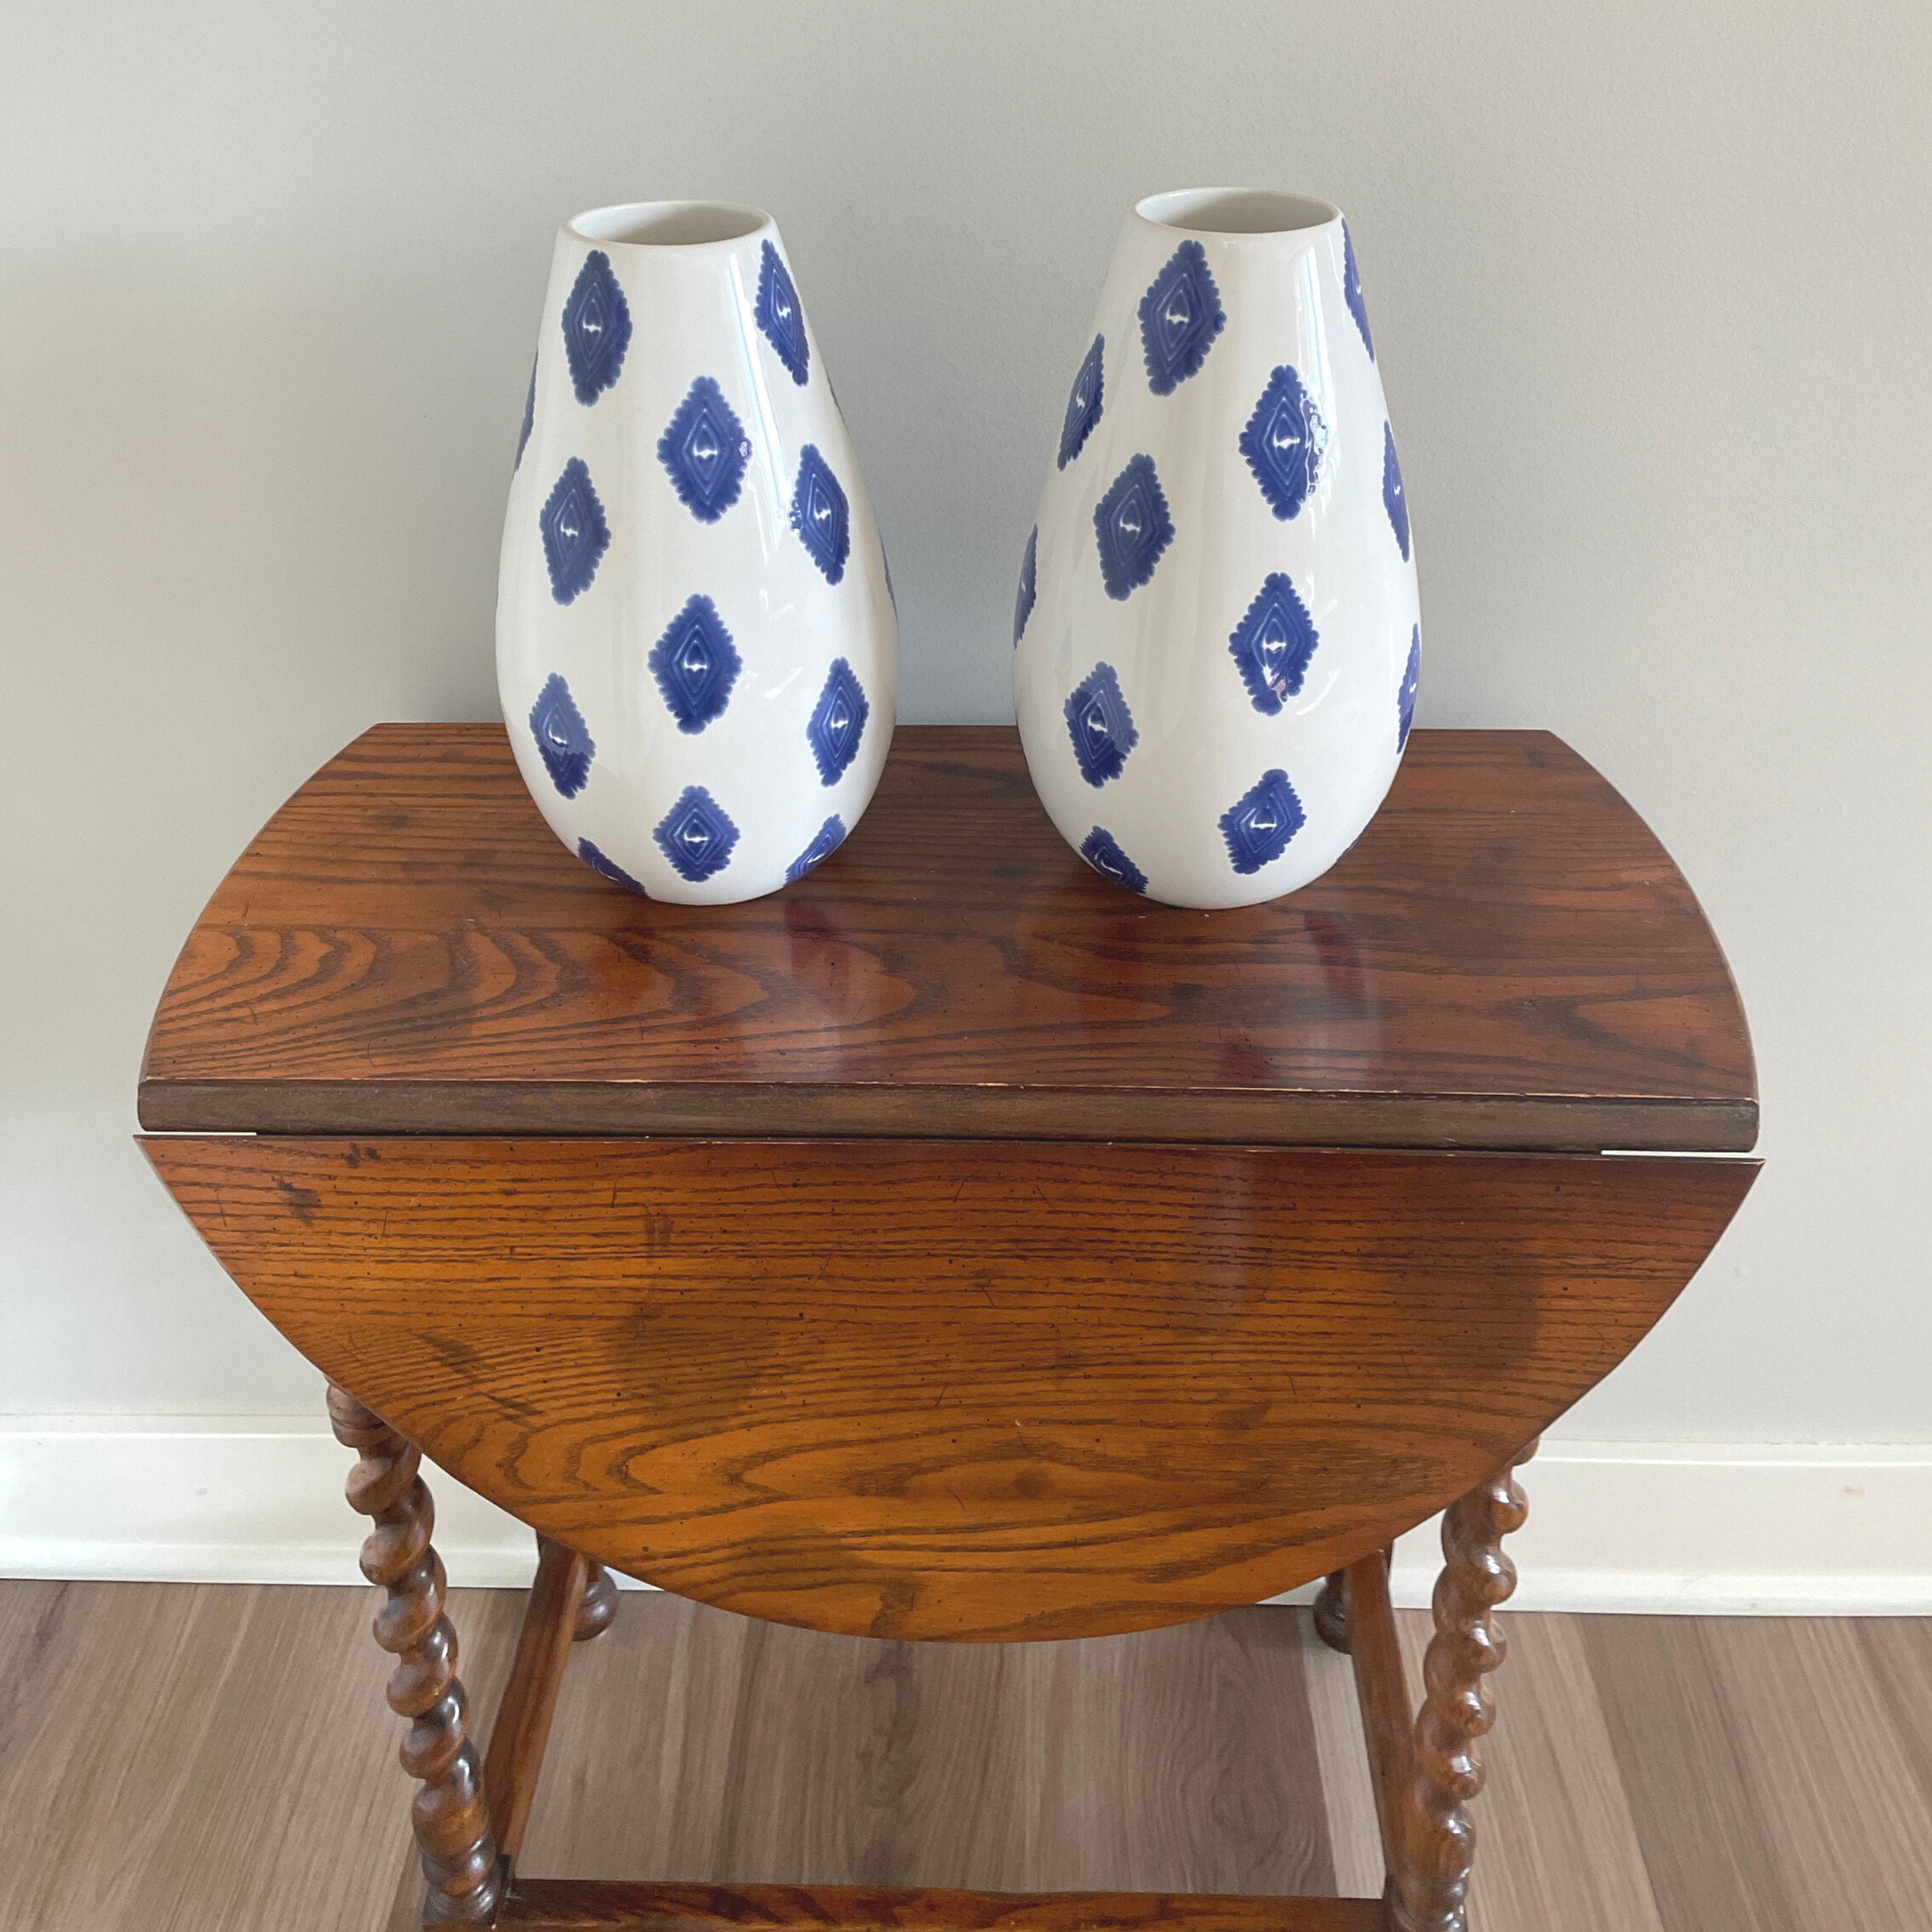 Pair of Blue and White Tall Vases